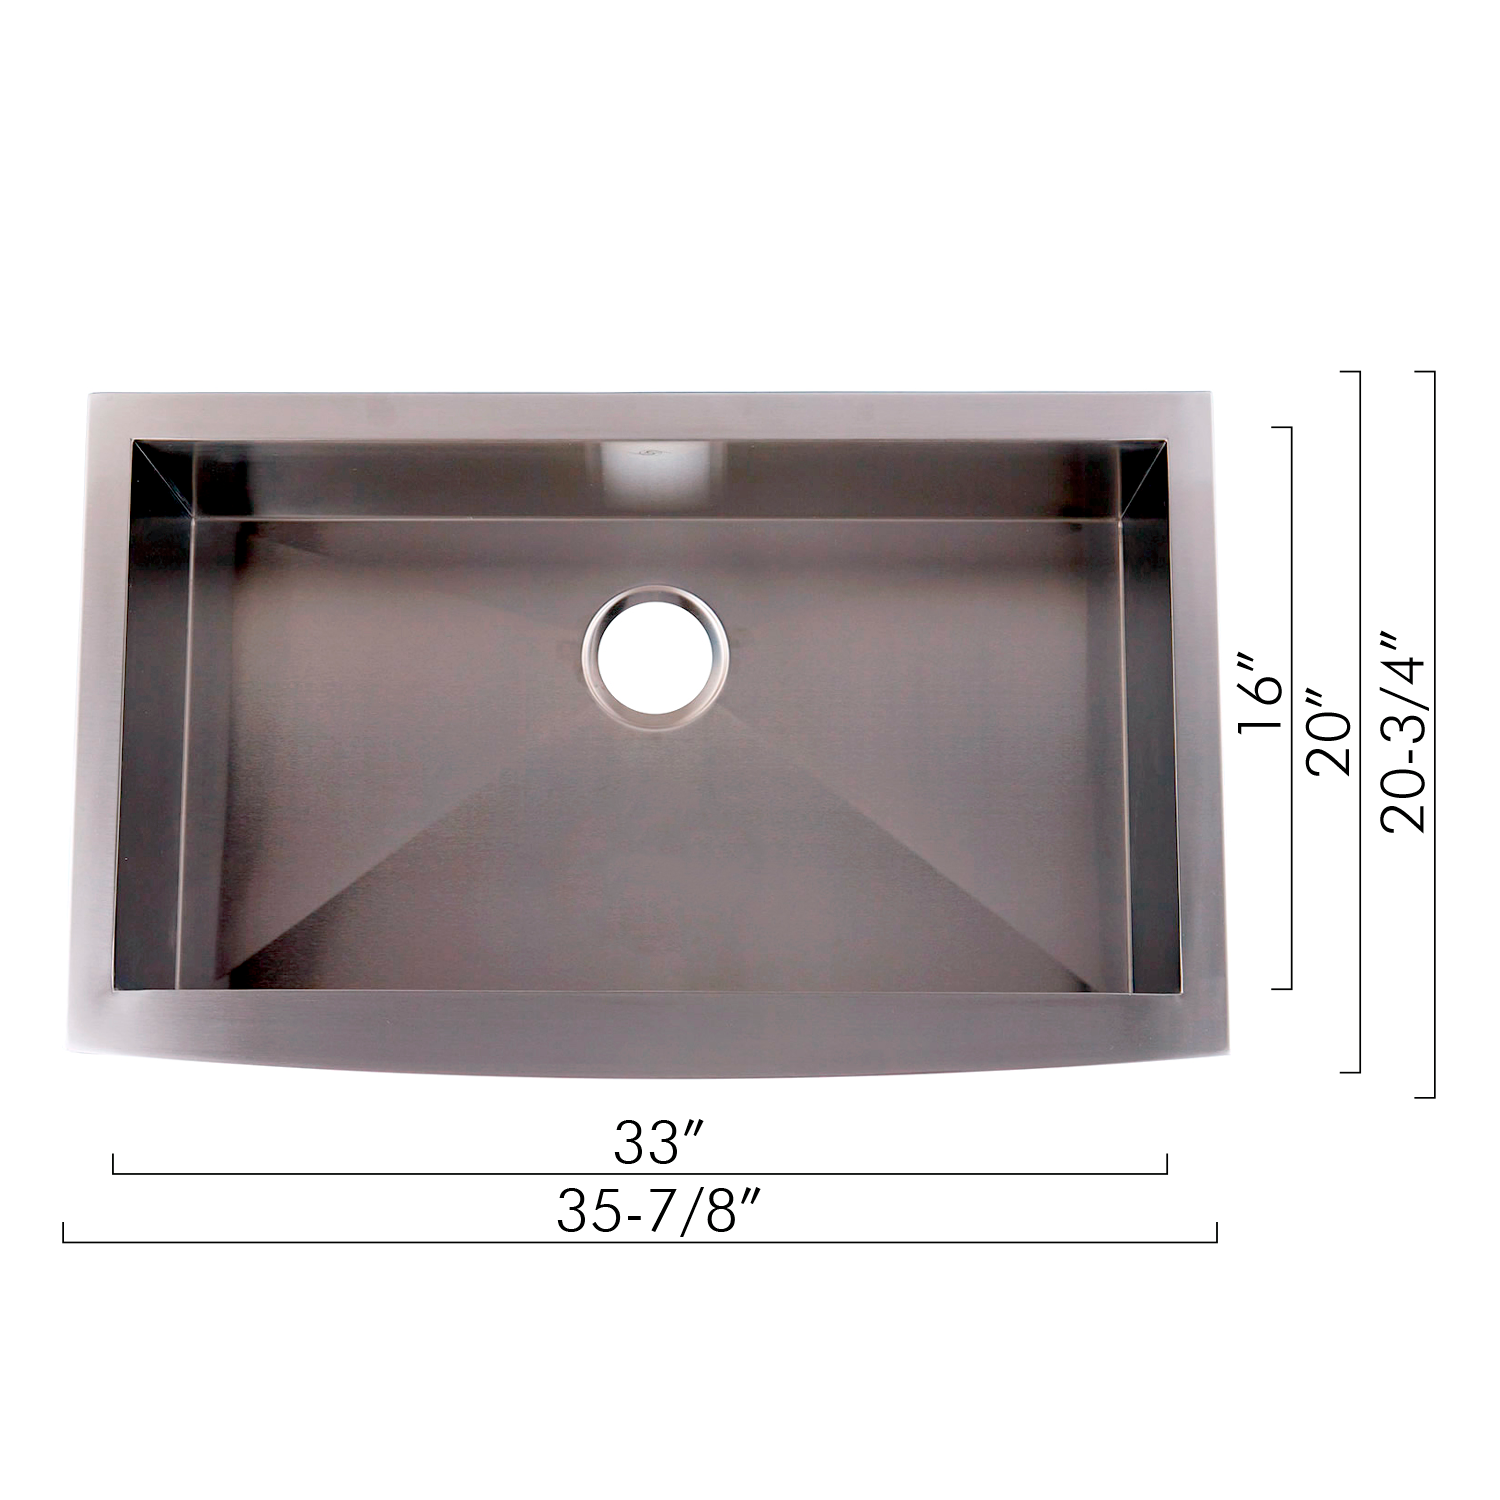 DAX Farmhouse Kitchen Sink, 16 Gauge Stainless Steel, Brushed Finish, 35-7/8 x 20 x 10 Inches (DAX-SQ-3621)